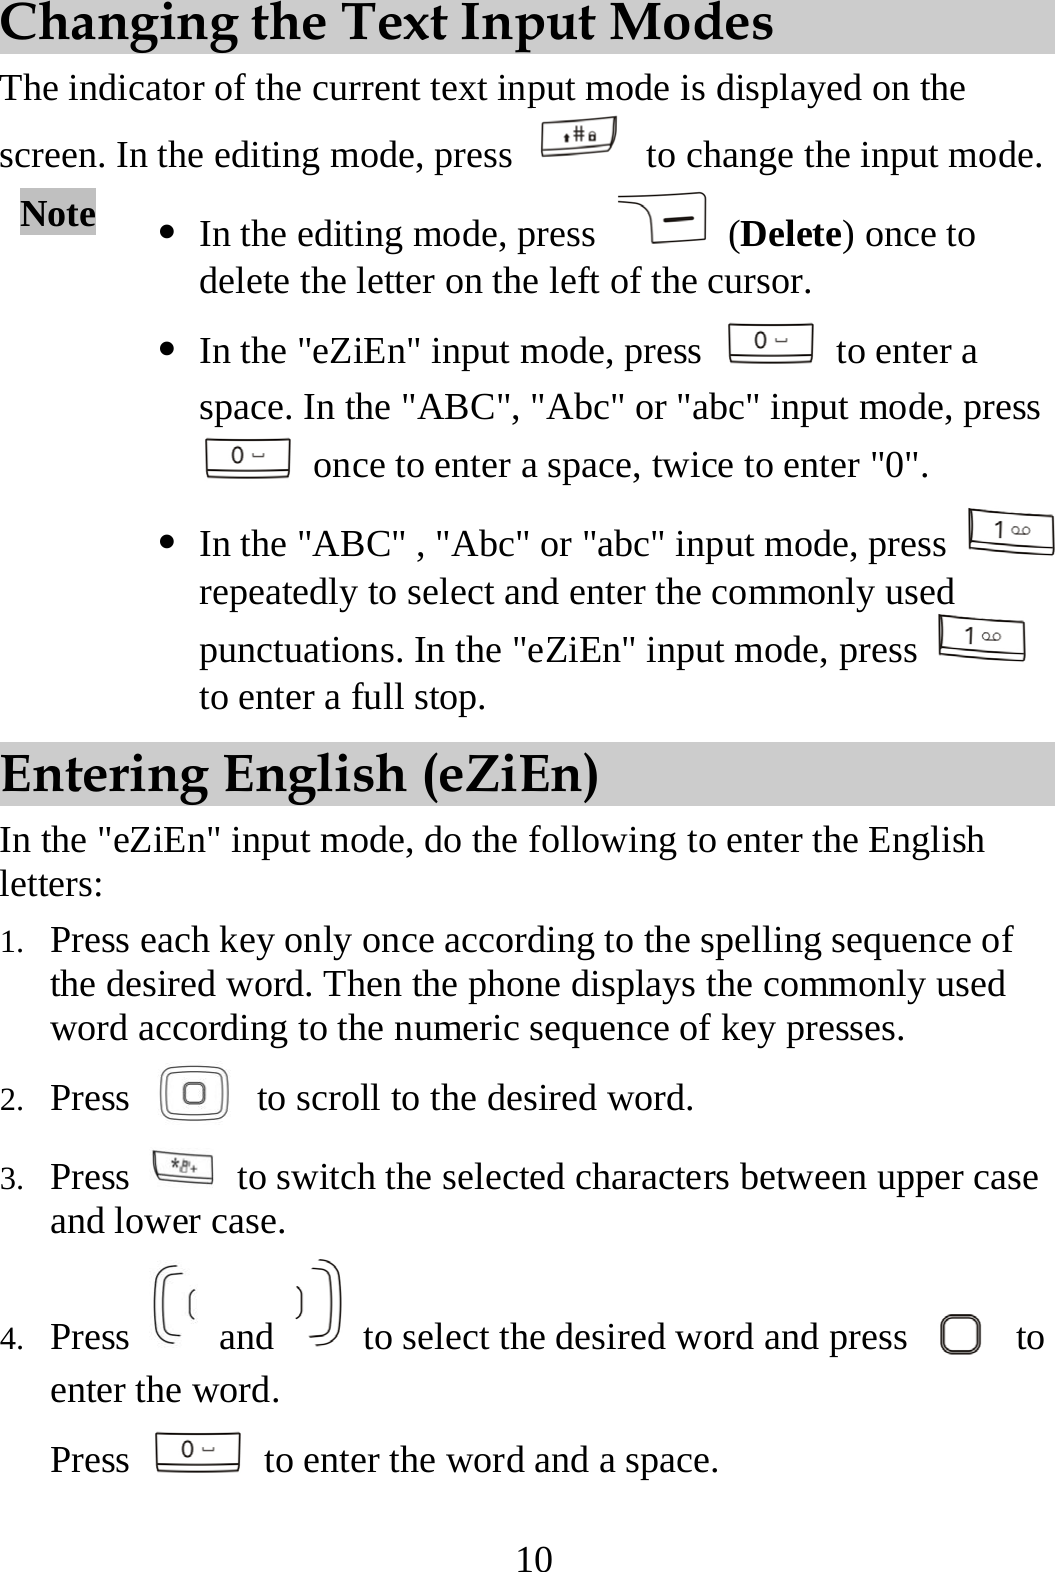 10 Changing the Text Input Modes The indicator of the current text input mode is displayed on the screen. In the editing mode, press    to change the input mode. Note  z In the editing mode, press   (Delete) once to delete the letter on the left of the cursor.   z In the &quot;eZiEn&quot; input mode, press   to enter a space. In the &quot;ABC&quot;, &quot;Abc&quot; or &quot;abc&quot; input mode, press   once to enter a space, twice to enter &quot;0&quot;. z In the &quot;ABC&quot; , &quot;Abc&quot; or &quot;abc&quot; input mode, press   repeatedly to select and enter the commonly used punctuations. In the &quot;eZiEn&quot; input mode, press   to enter a full stop. Entering English (eZiEn) In the &quot;eZiEn&quot; input mode, do the following to enter the English letters: 1. Press each key only once according to the spelling sequence of the desired word. Then the phone displays the commonly used word according to the numeric sequence of key presses. 2. Press    to scroll to the desired word. 3. Press    to switch the selected characters between upper case and lower case. 4. Press   and    to select the desired word and press   to enter the word. Press    to enter the word and a space. 